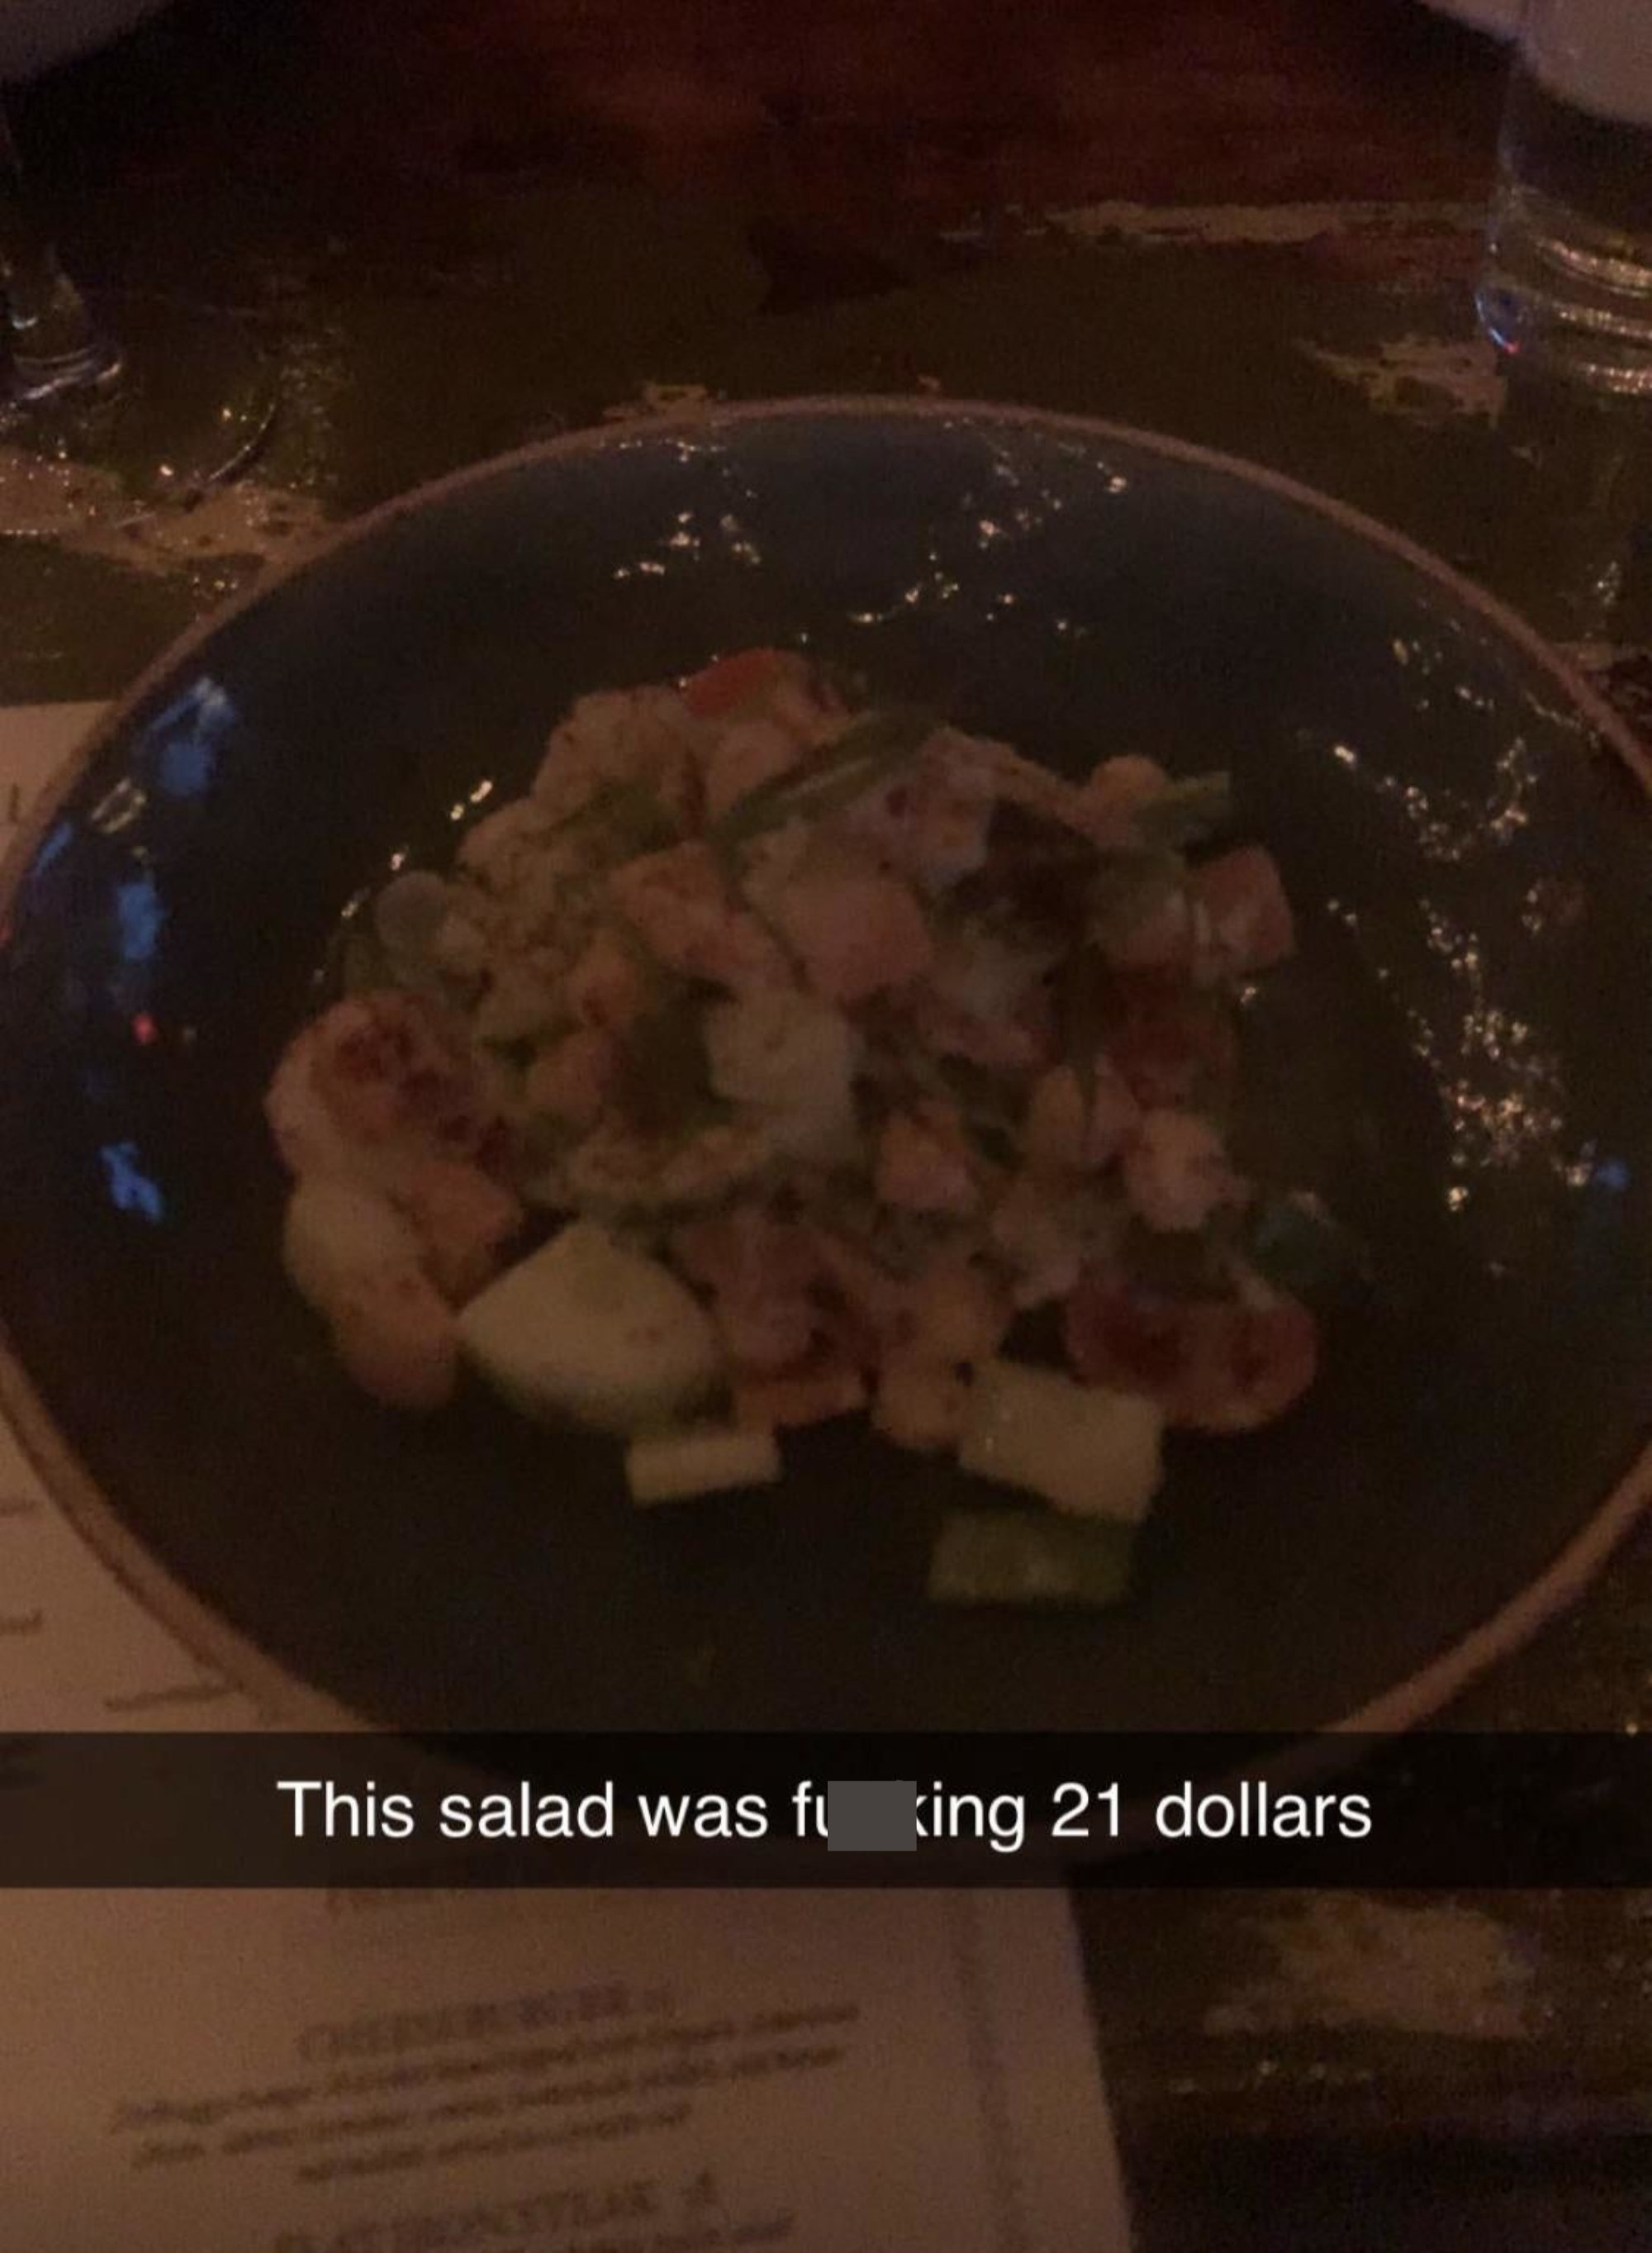 &quot;This salad was f**king 21 dollars&quot;